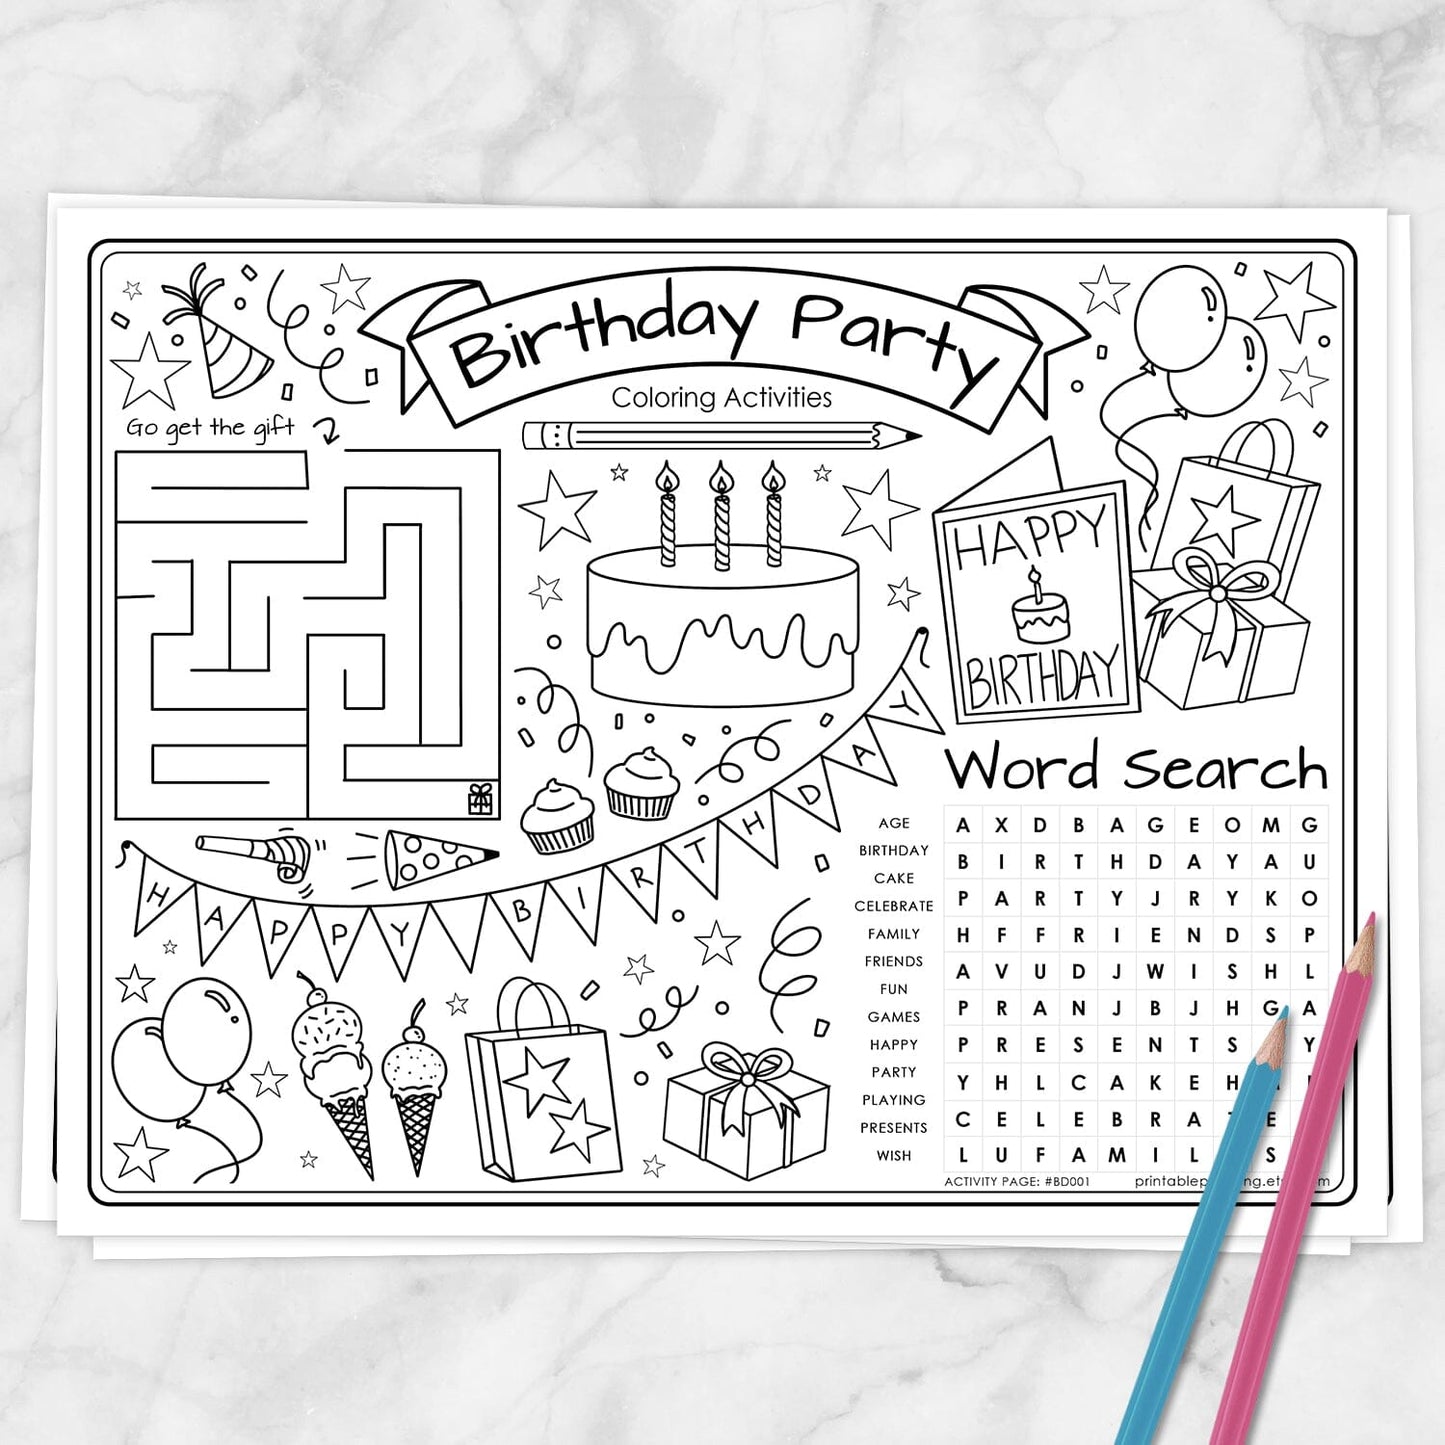 Printable Birthday Party Coloring Activity Sheet at Printable Planning.